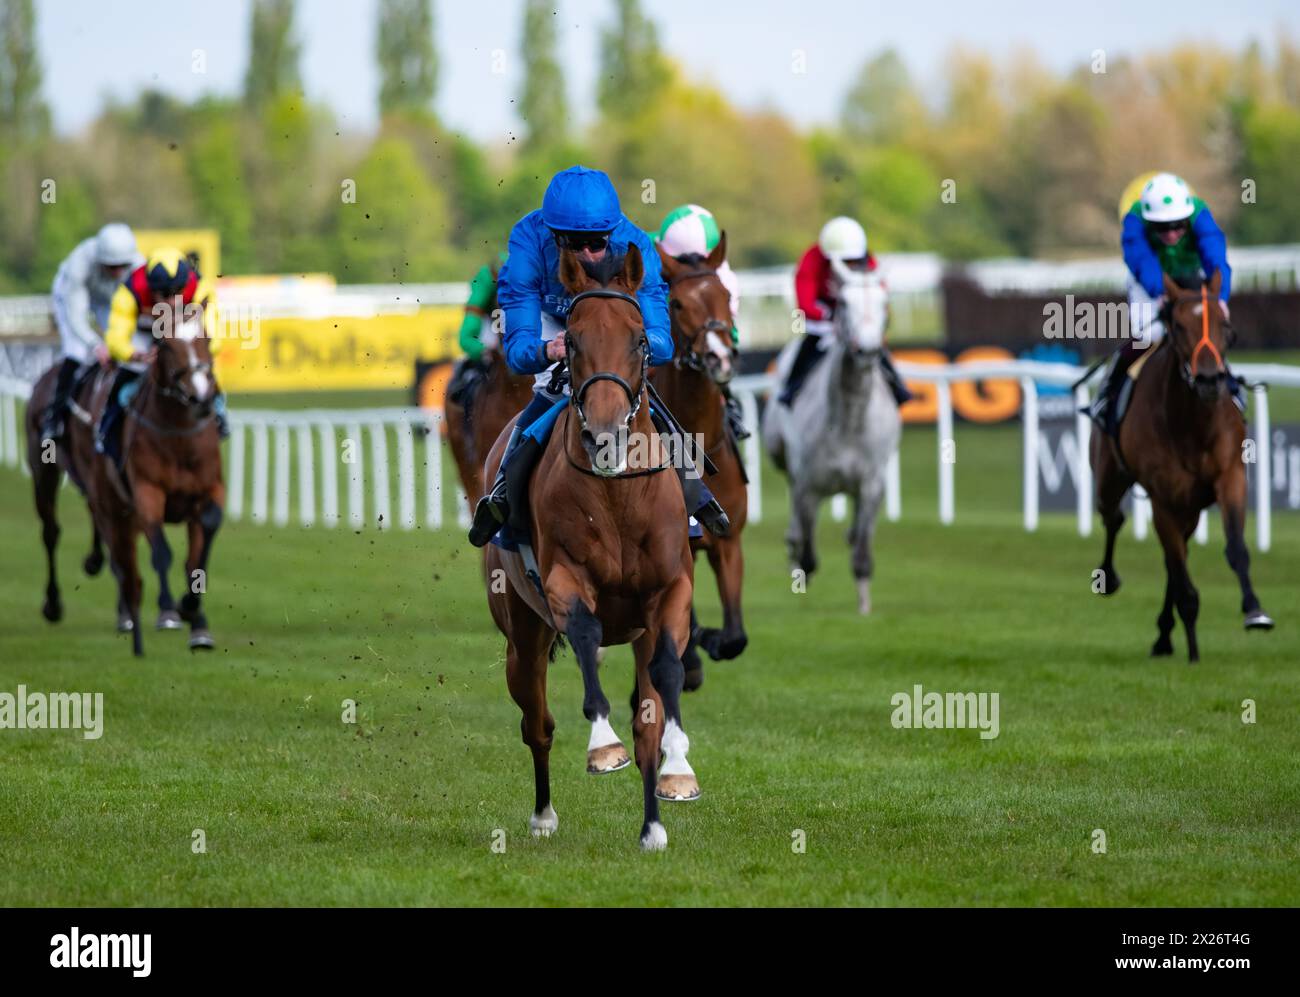 Hidden Law and William Buick win the Darley Confined Maiden Stakes for trainer Charlie Appleby and owners Godolphin. Credit JTW Equine Images / Alamy Stock Photo